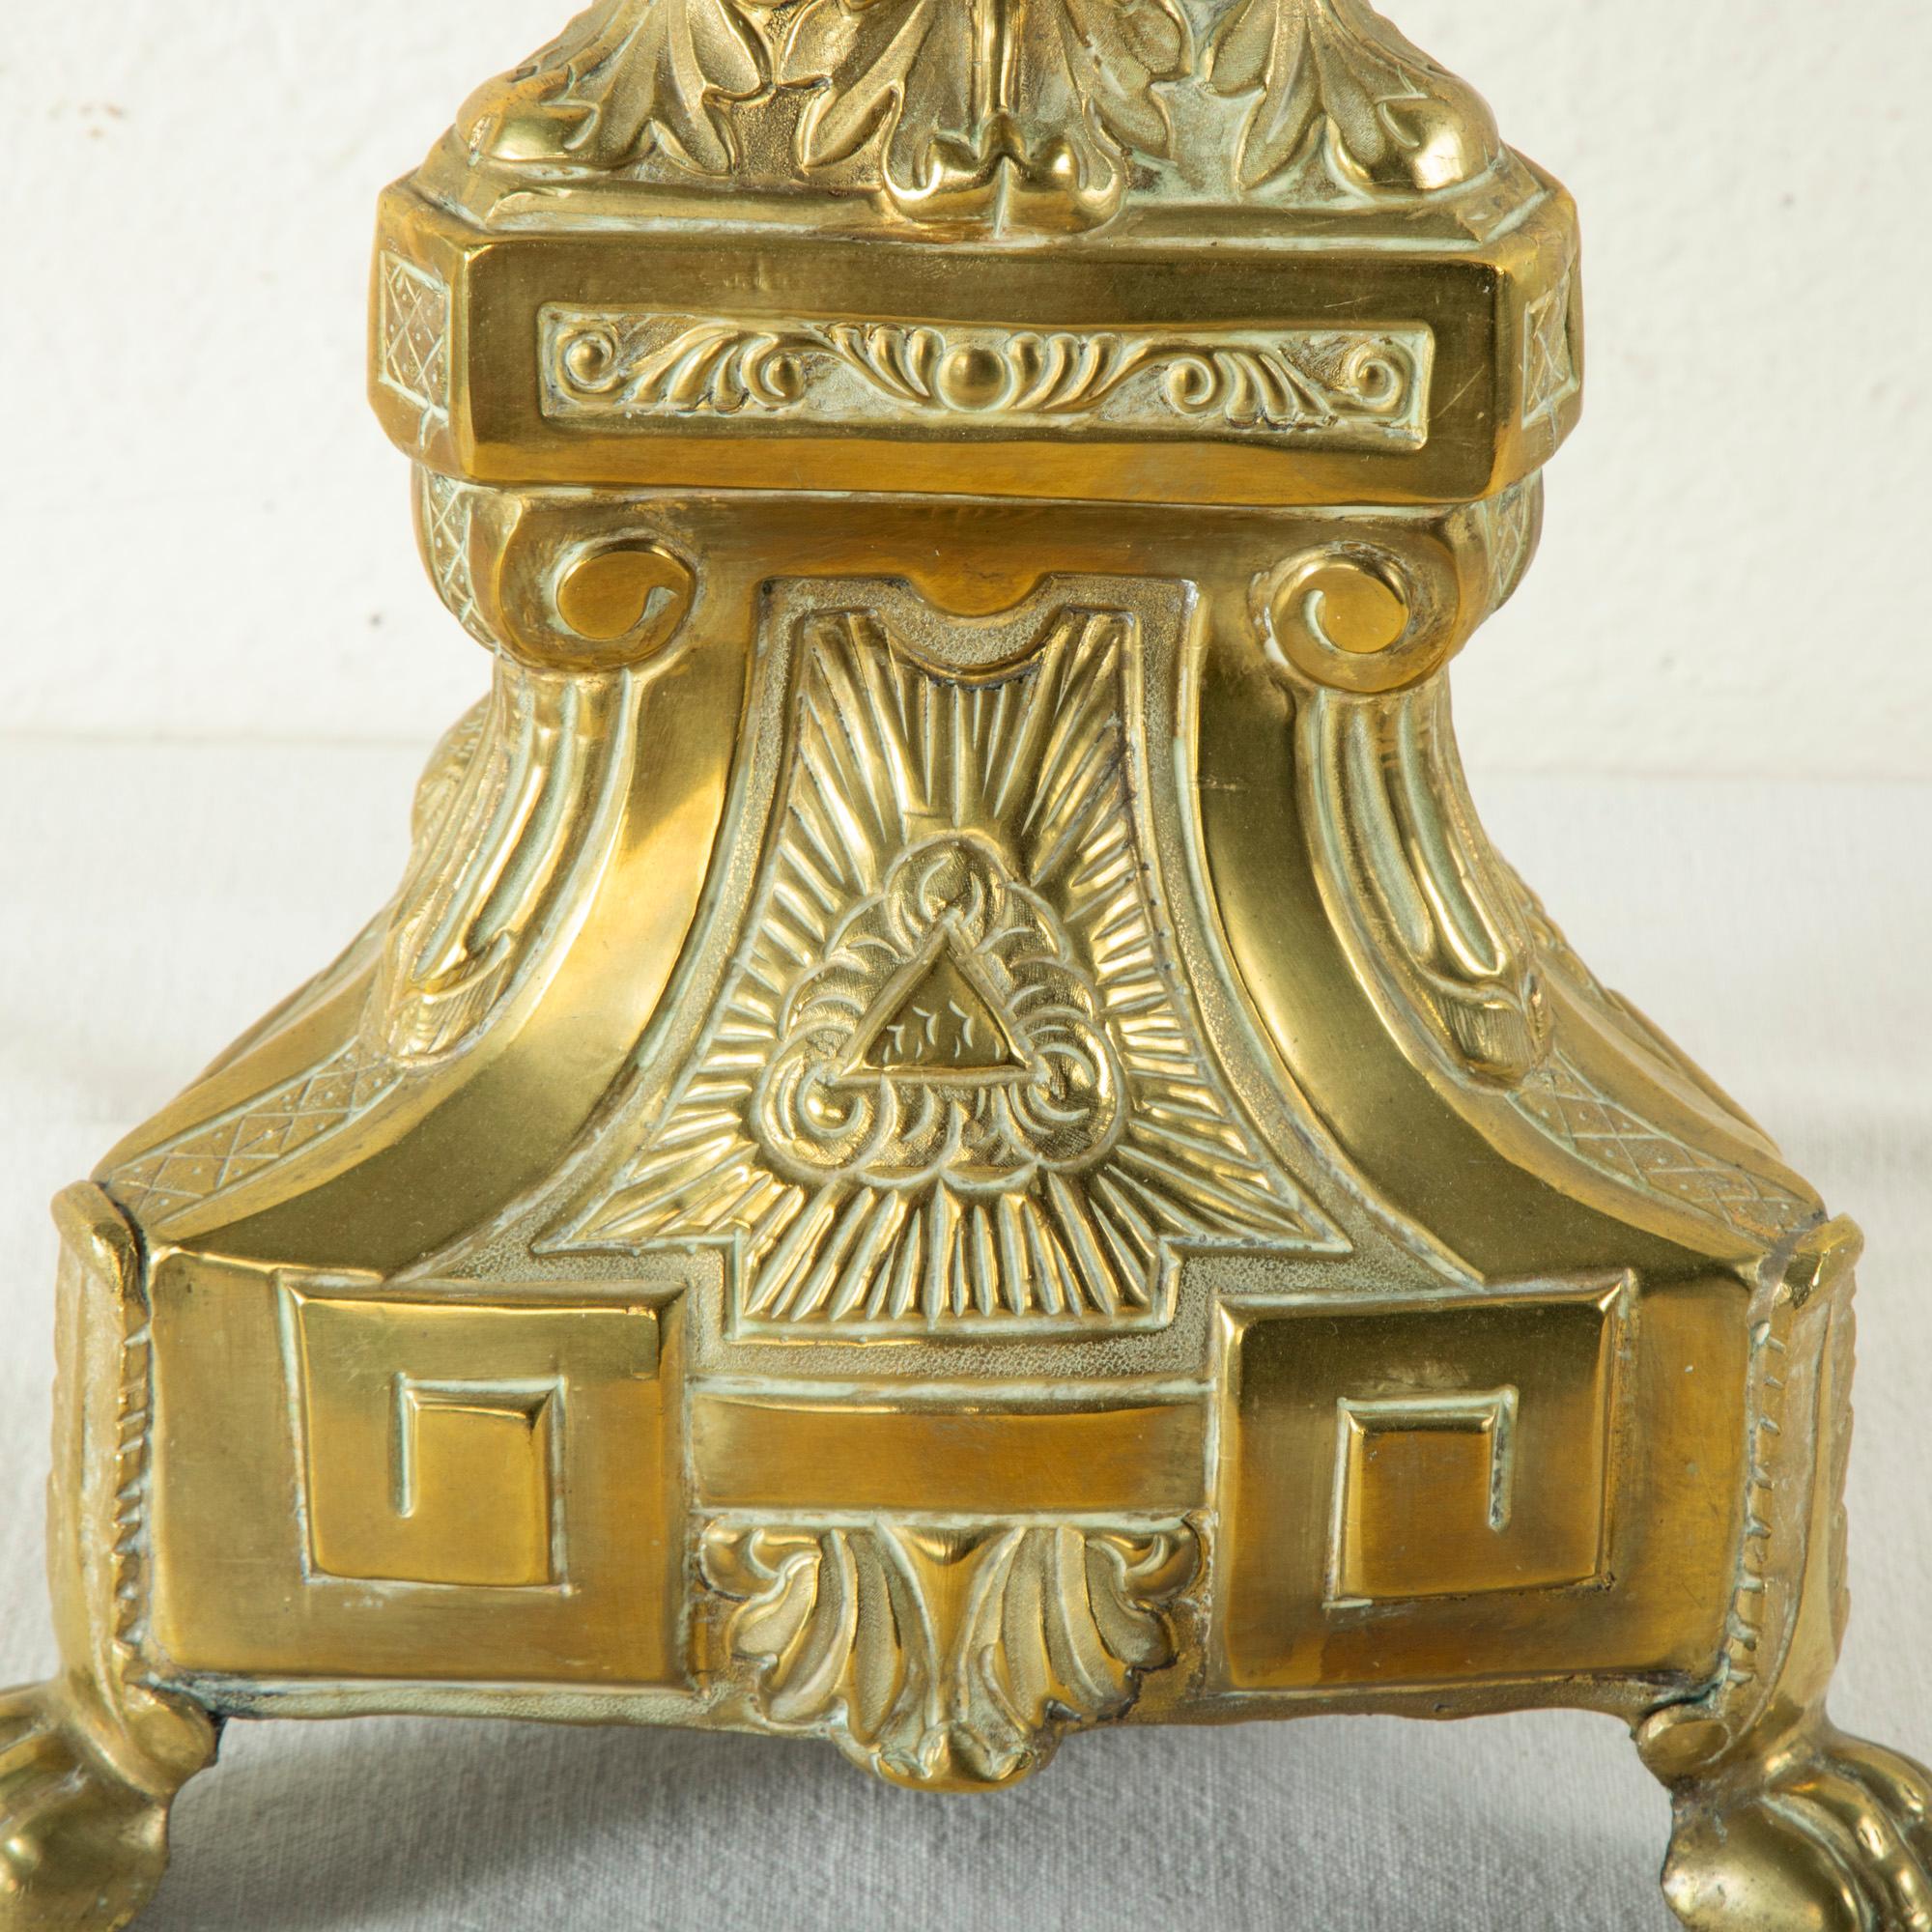 Tall Late 19th Century Brass Repousse Church Pricket, Candlestick For Sale 4